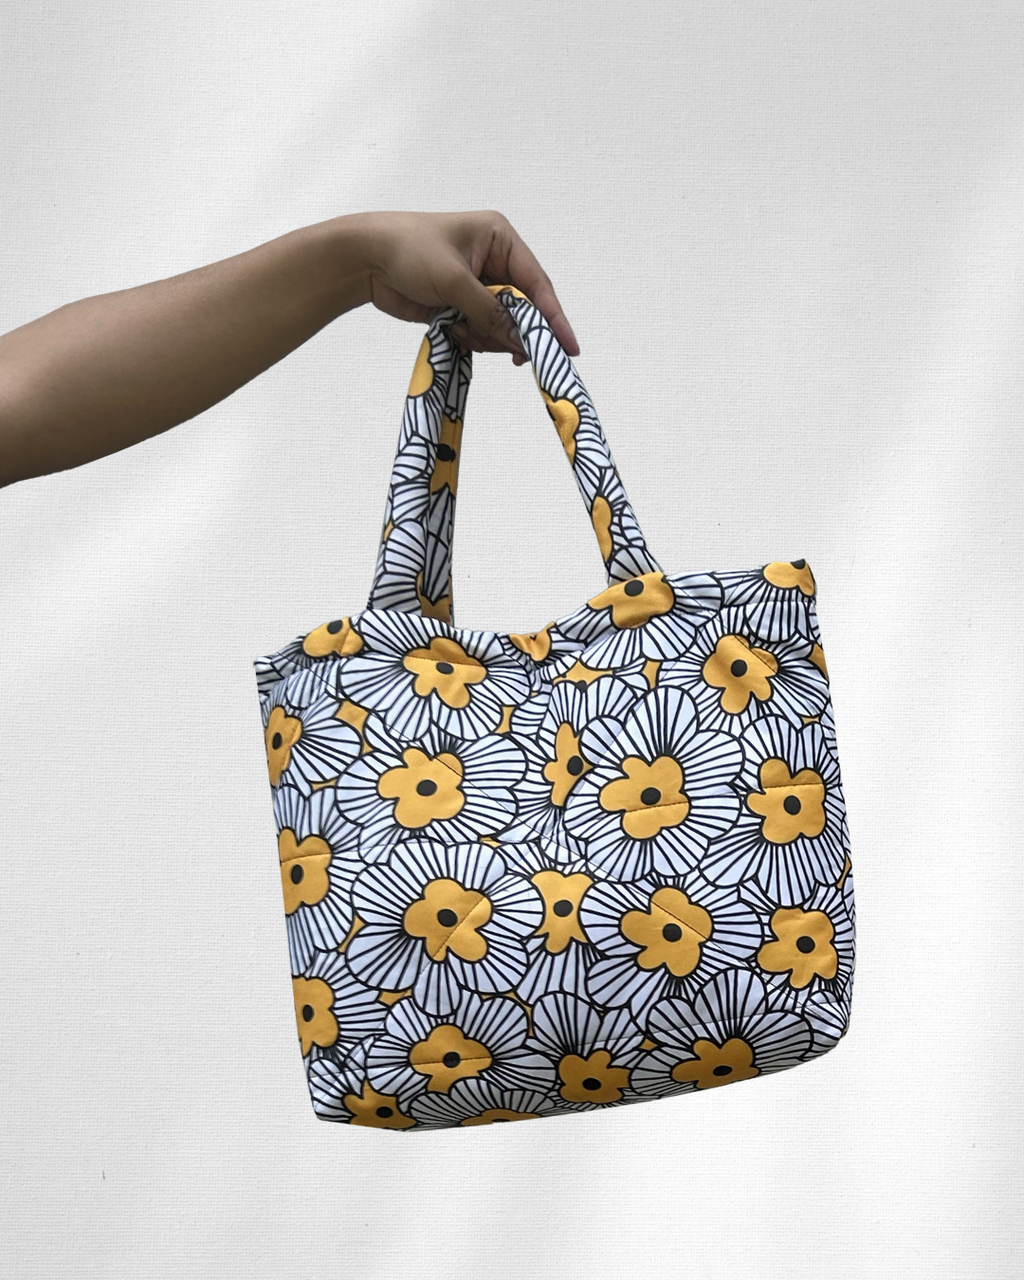 Plush Large Puffy Bag in Sunflower